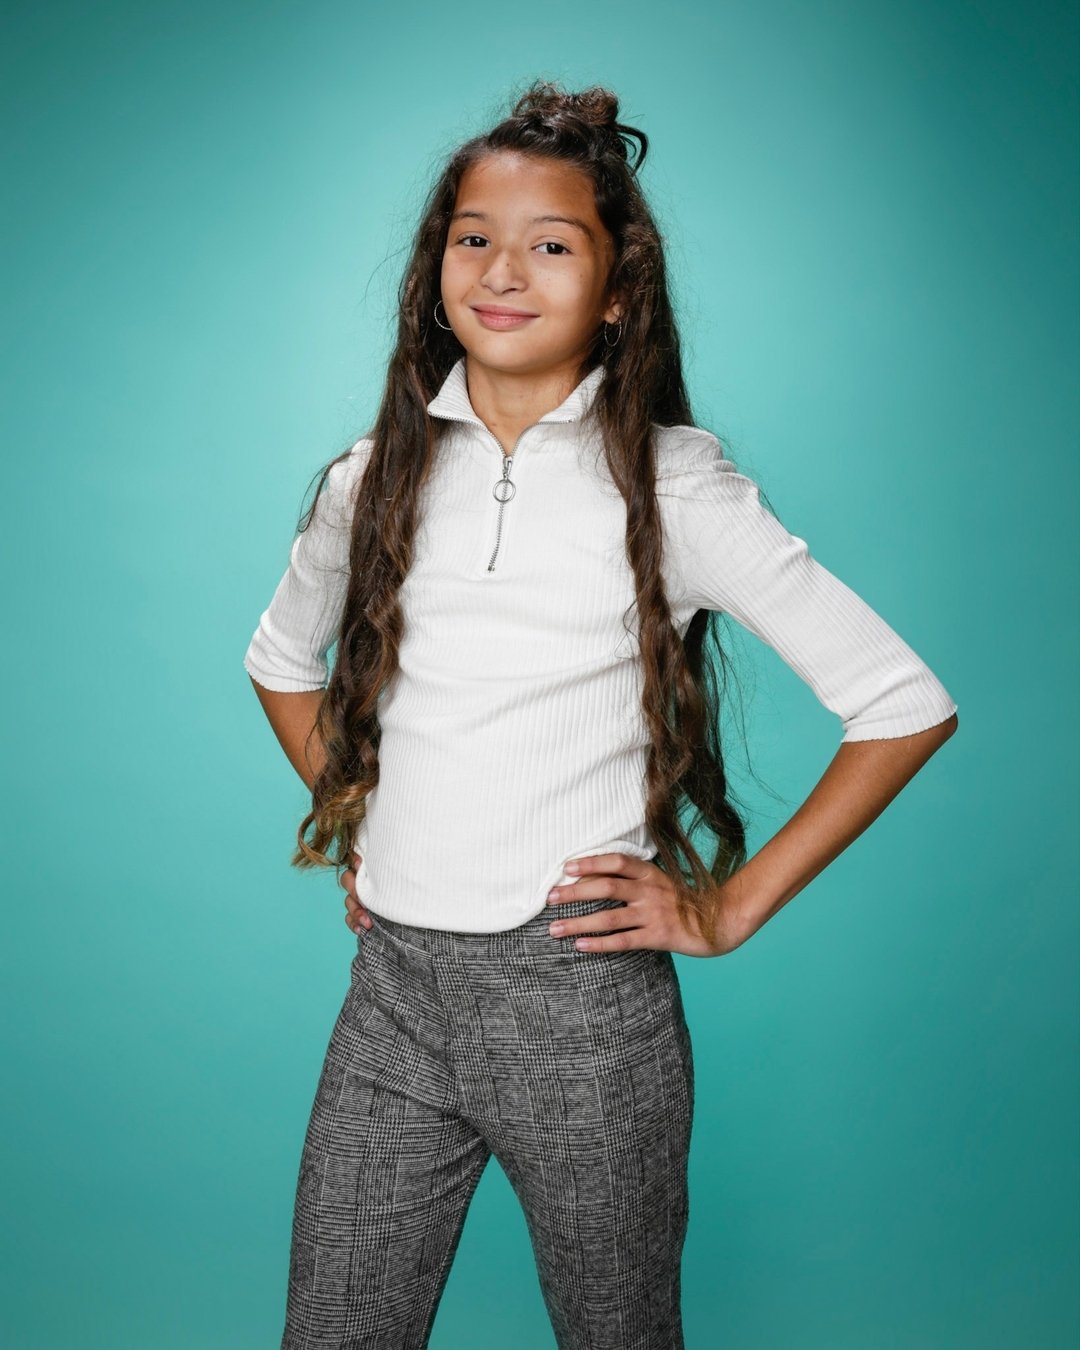 Channeling the calm and cool vibes of Teal Tuesdays! 
😎😎 

🐠📸 #TealTuesdayVibes #PictureDayJoy

#schoolpictures2023 #schoolpics #schoolpictures #earlybird #nycschools #nycpublicschools #nyccharterschools #TEACHNYC #schoolpictures2024 #schoolpics 